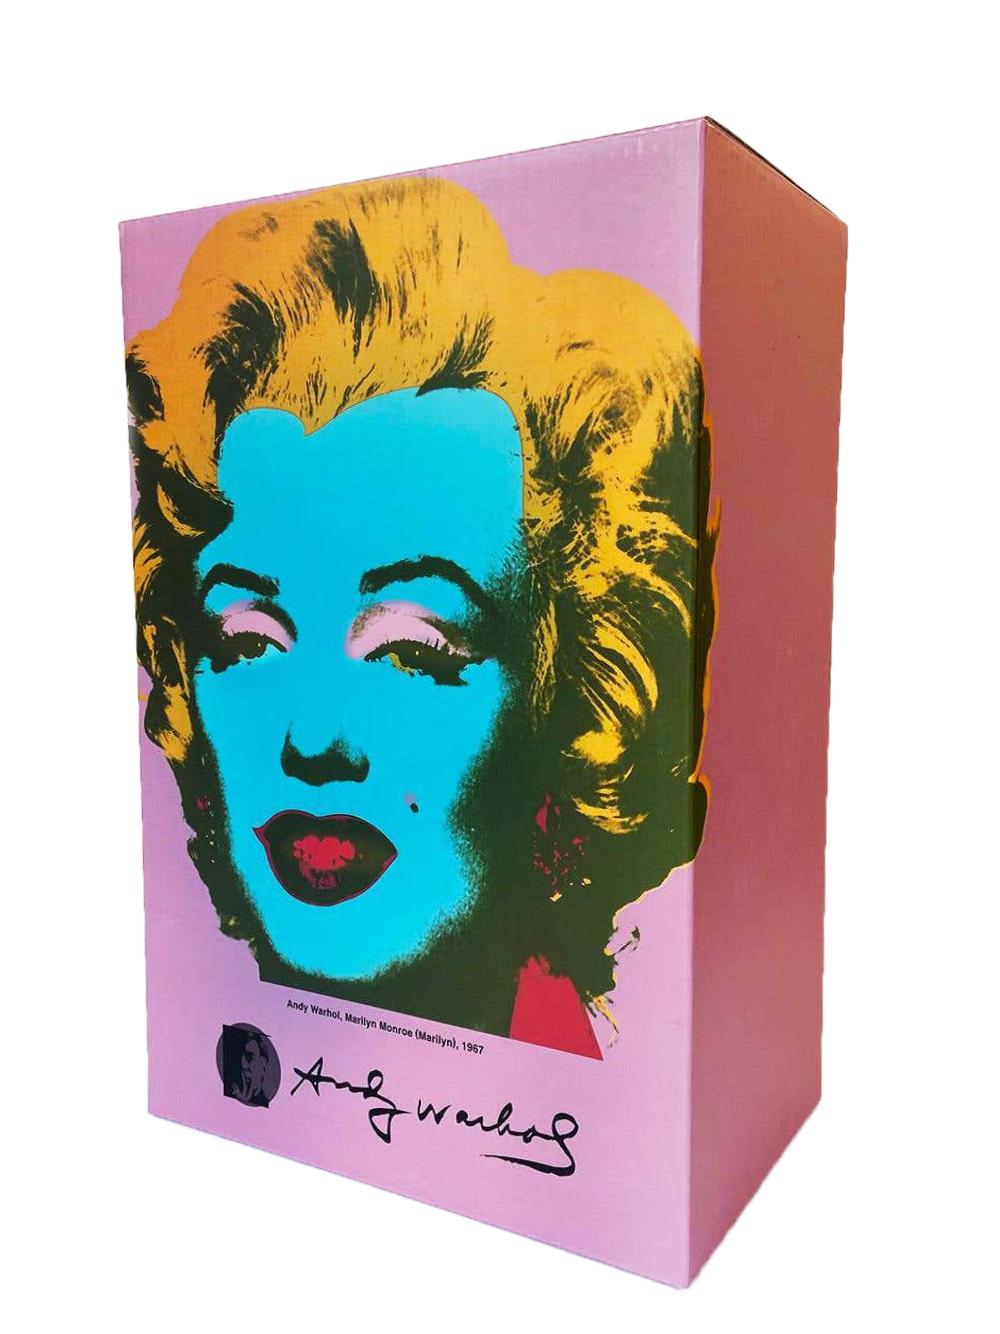 Andy Warhol Marilyn 400% Bearbrick Vinyl Figure (set of two: 400% + 100%):
A unique, timeless Andy Warhol Marilyn figure trademarked & licensed by the Estate of Andy Warhol. The partnered collectible reveals Warhol's iconic 1967 Marilyn Monroe